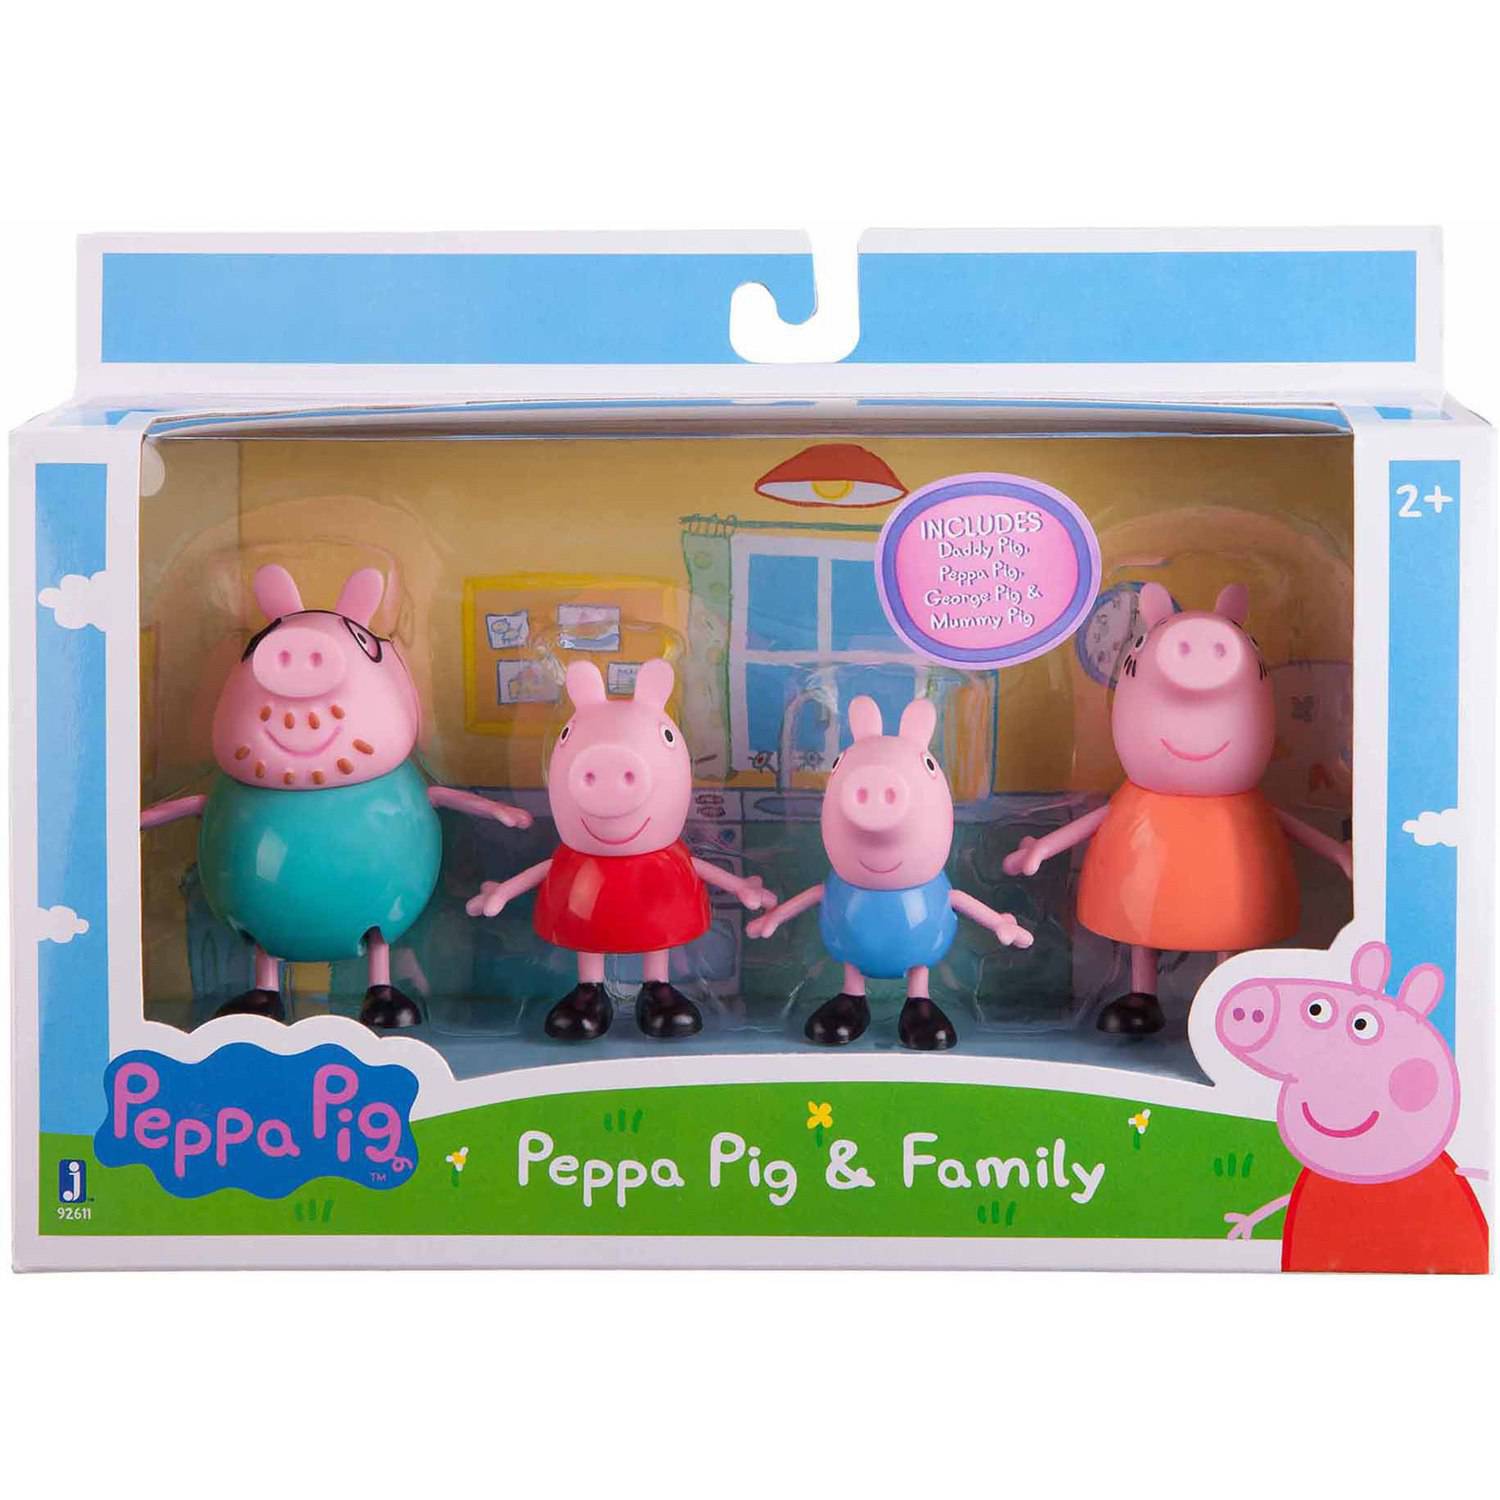 Peppa Pig Figure 4 pack, Family Pack - image 2 of 2